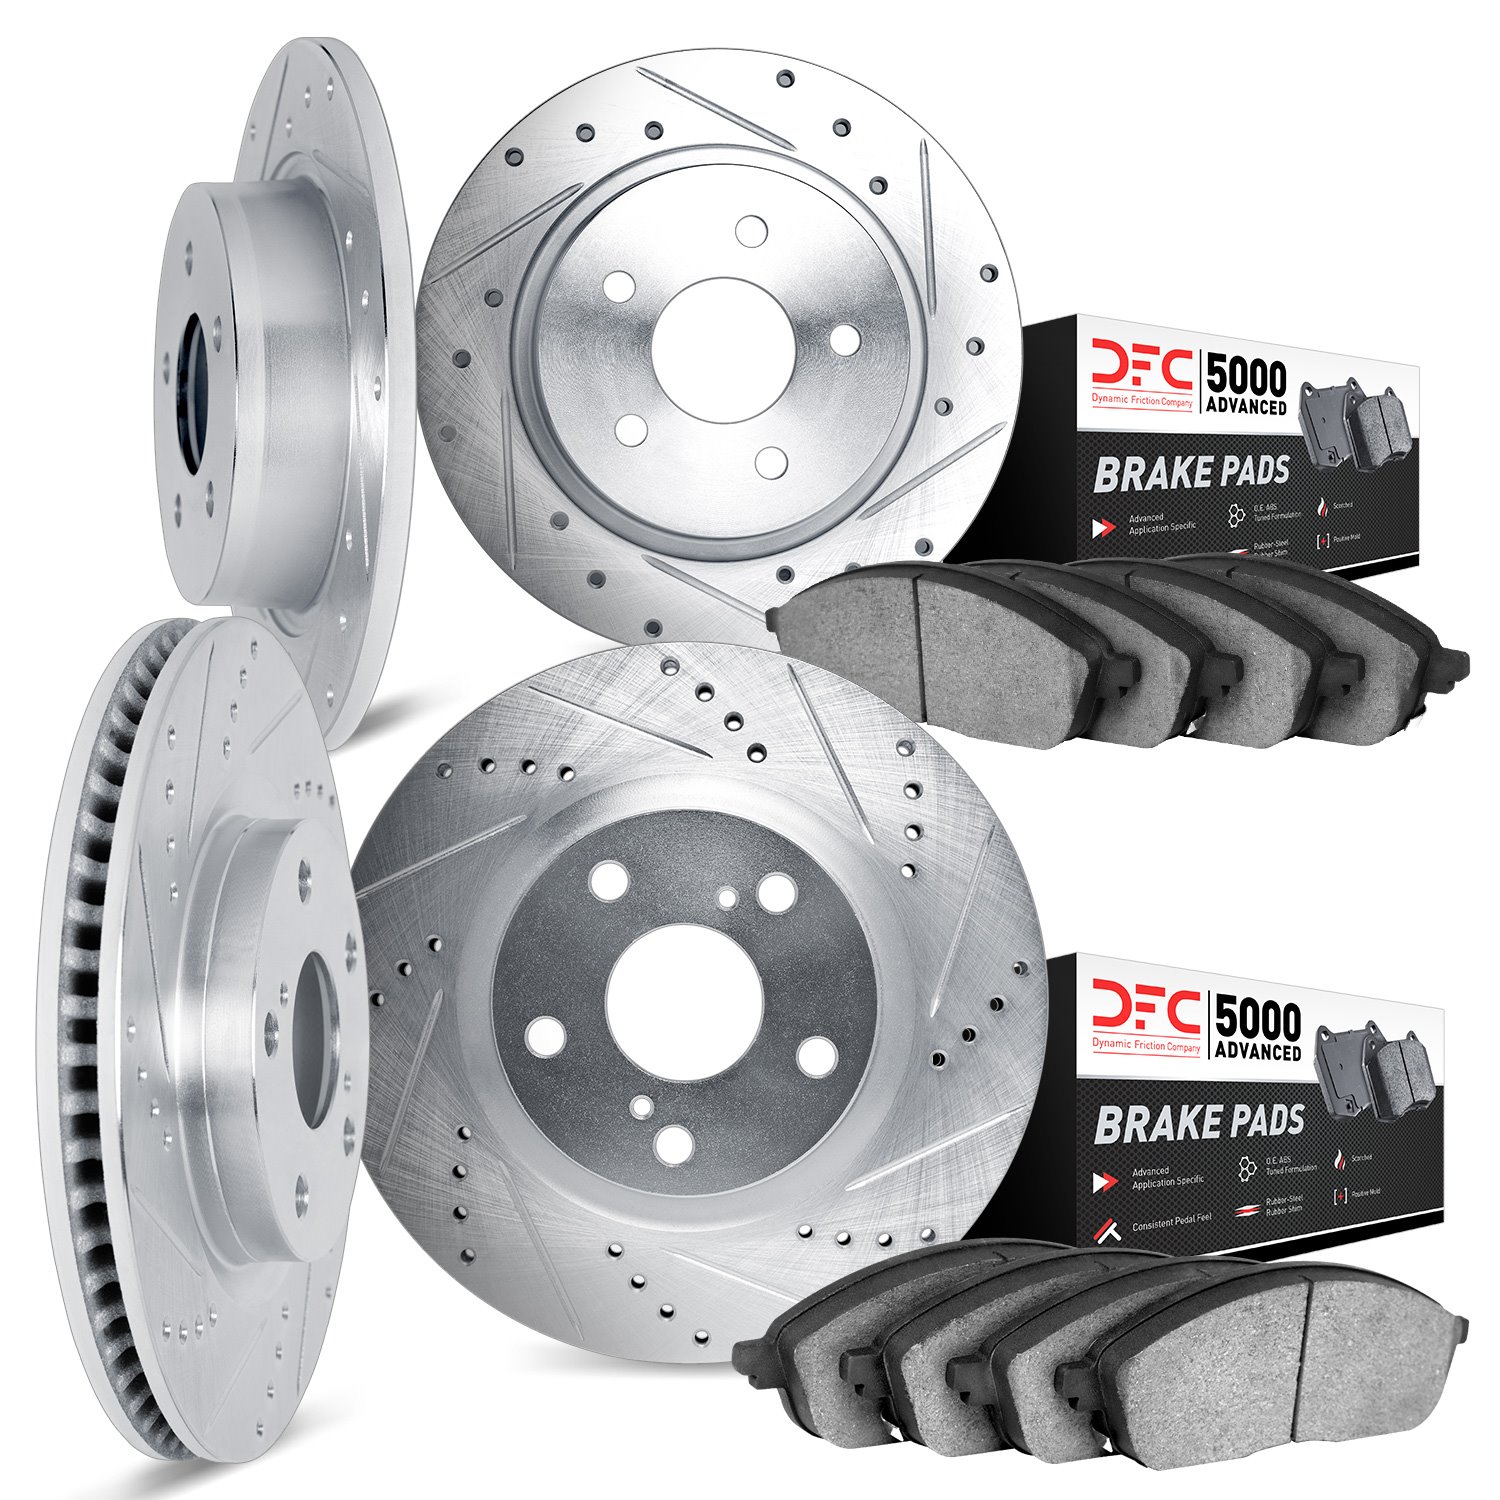 7504-16001 Drilled/Slotted Brake Rotors w/5000 Advanced Brake Pads Kit [Silver], 1987-1989 Alfa Romeo, Position: Front and Rear